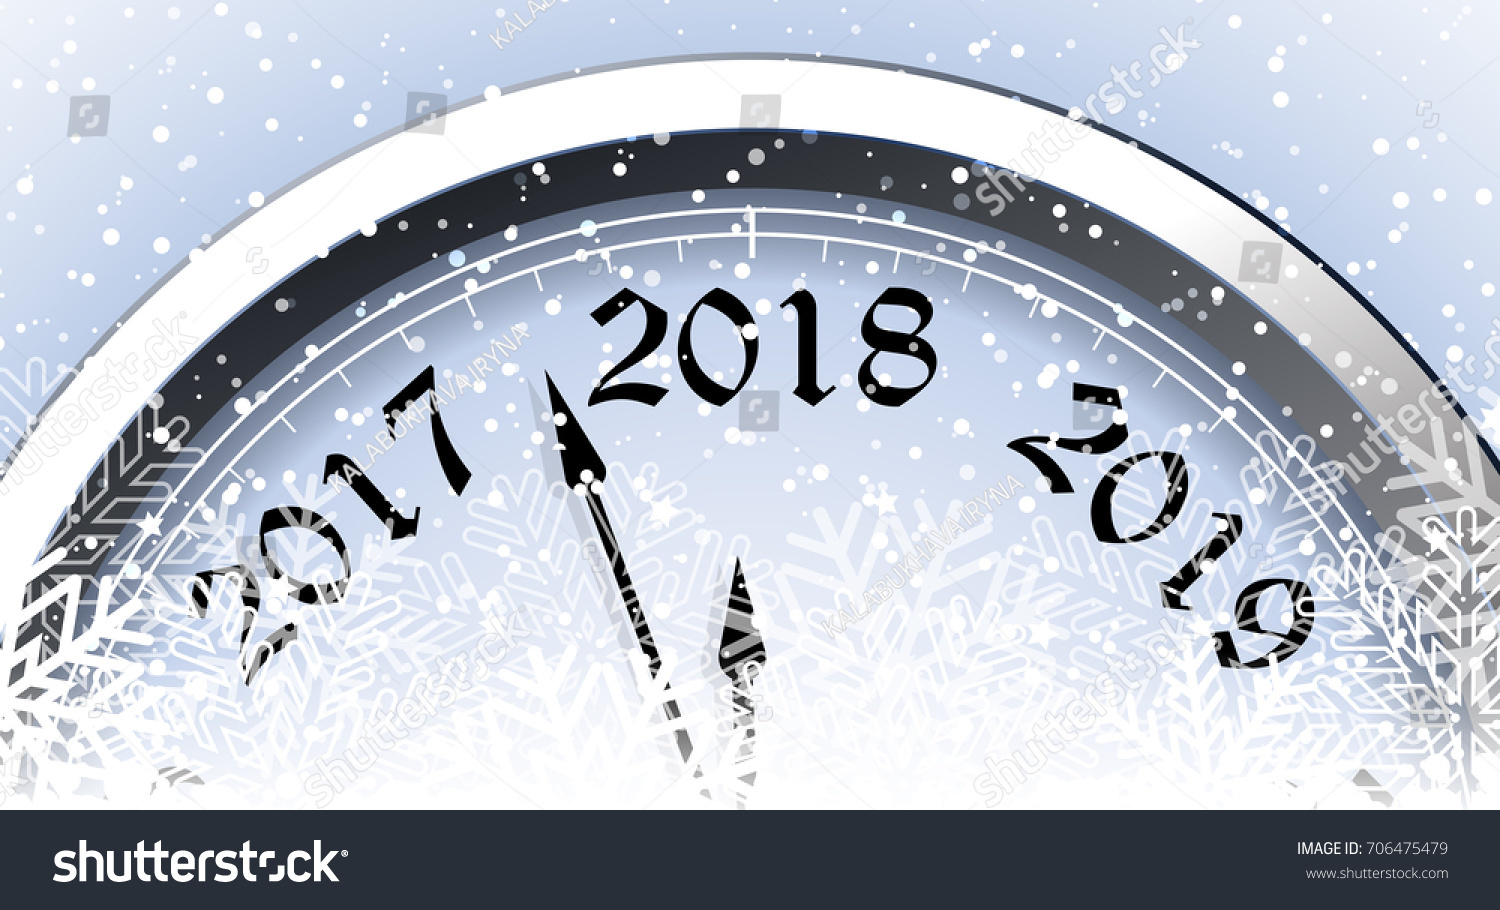 New Year's Eve 2018 #706475479